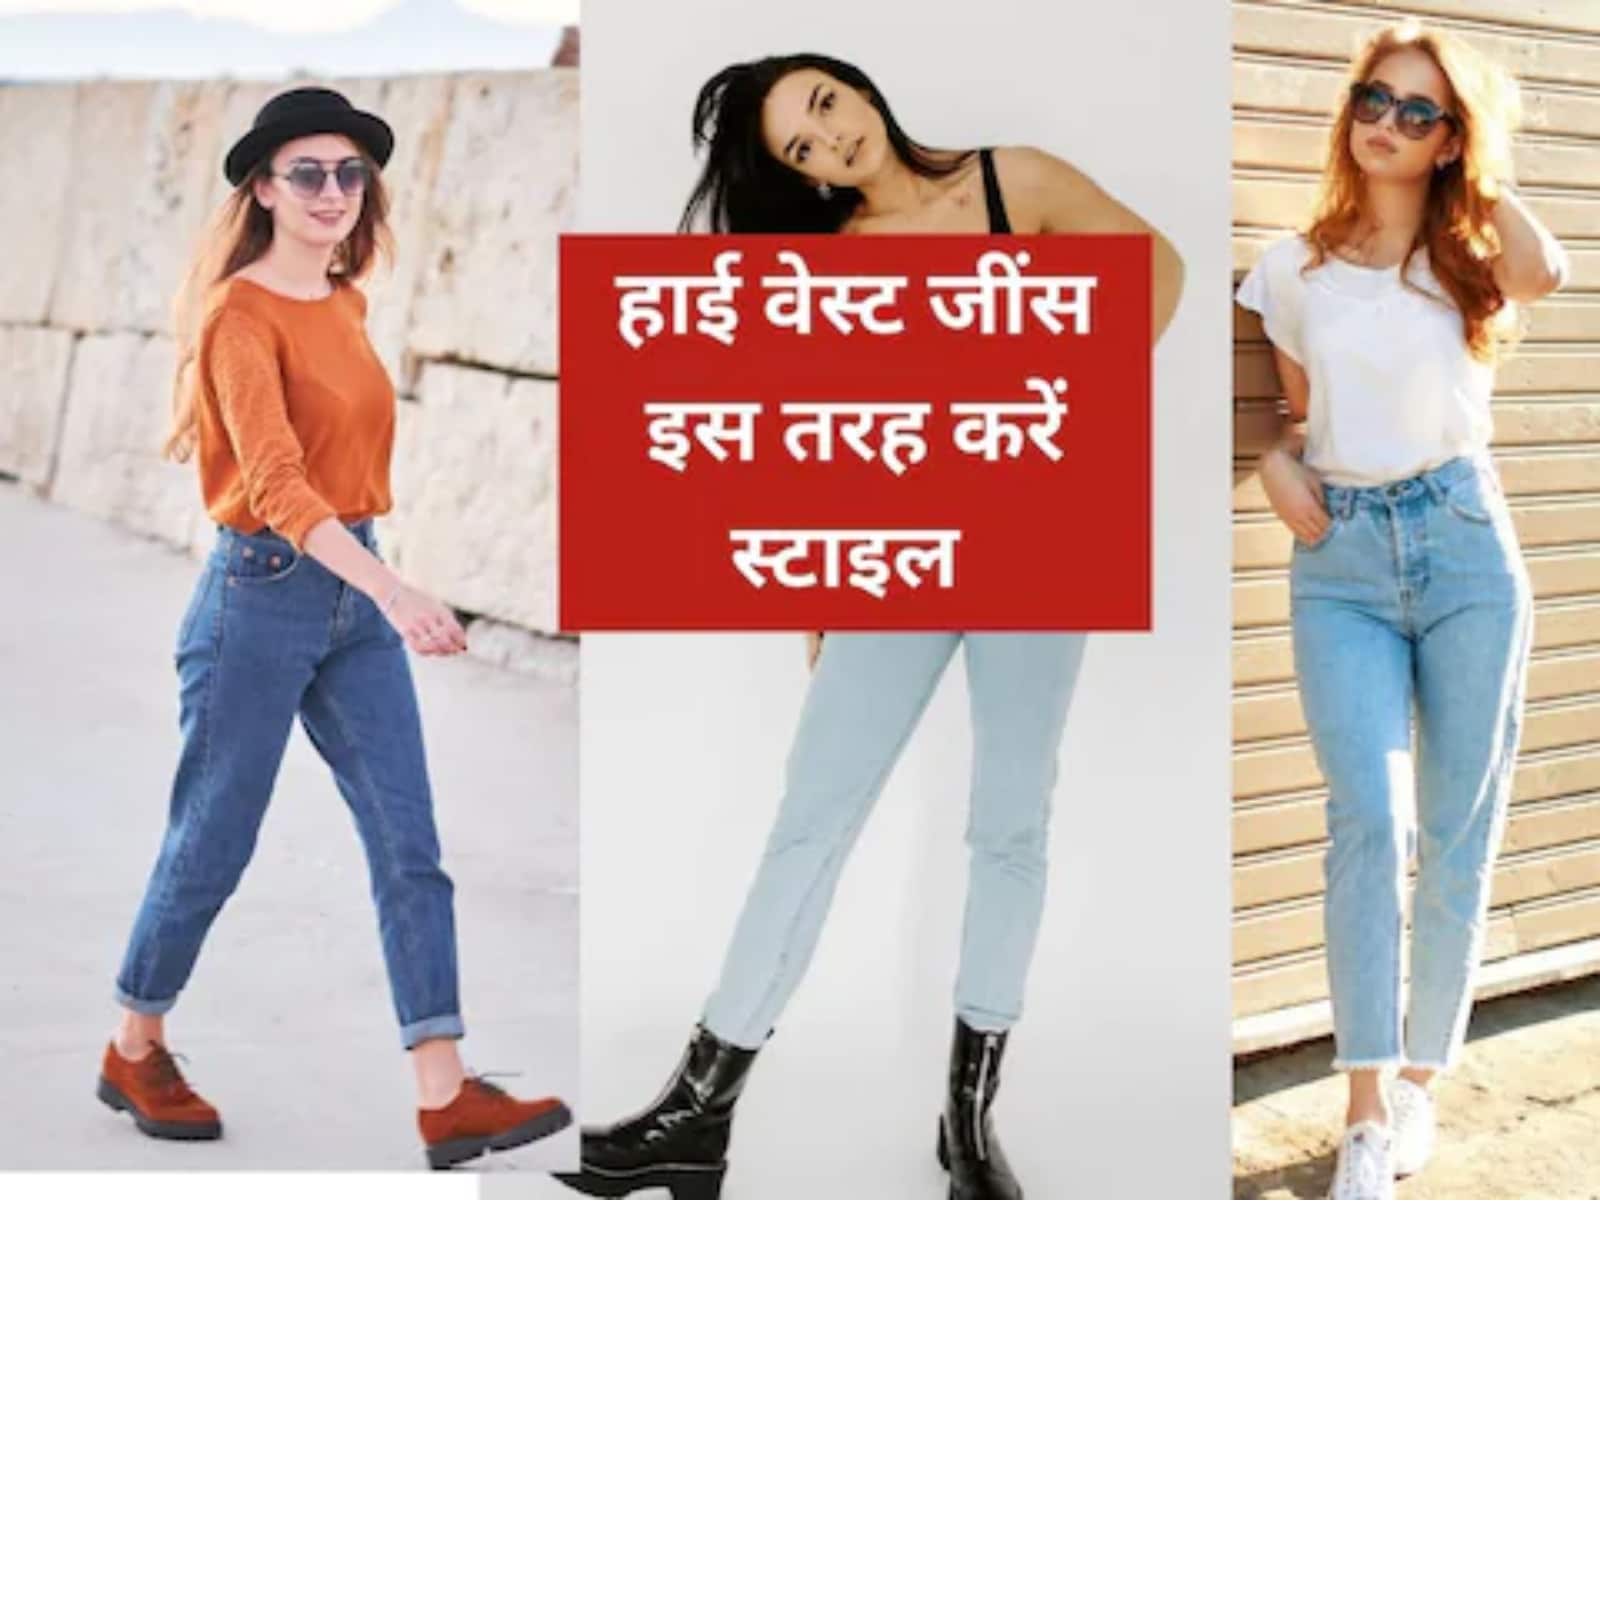 From Crop Top to Kurti, 5 Amazing Ways To Style High Waist Jeans - News18